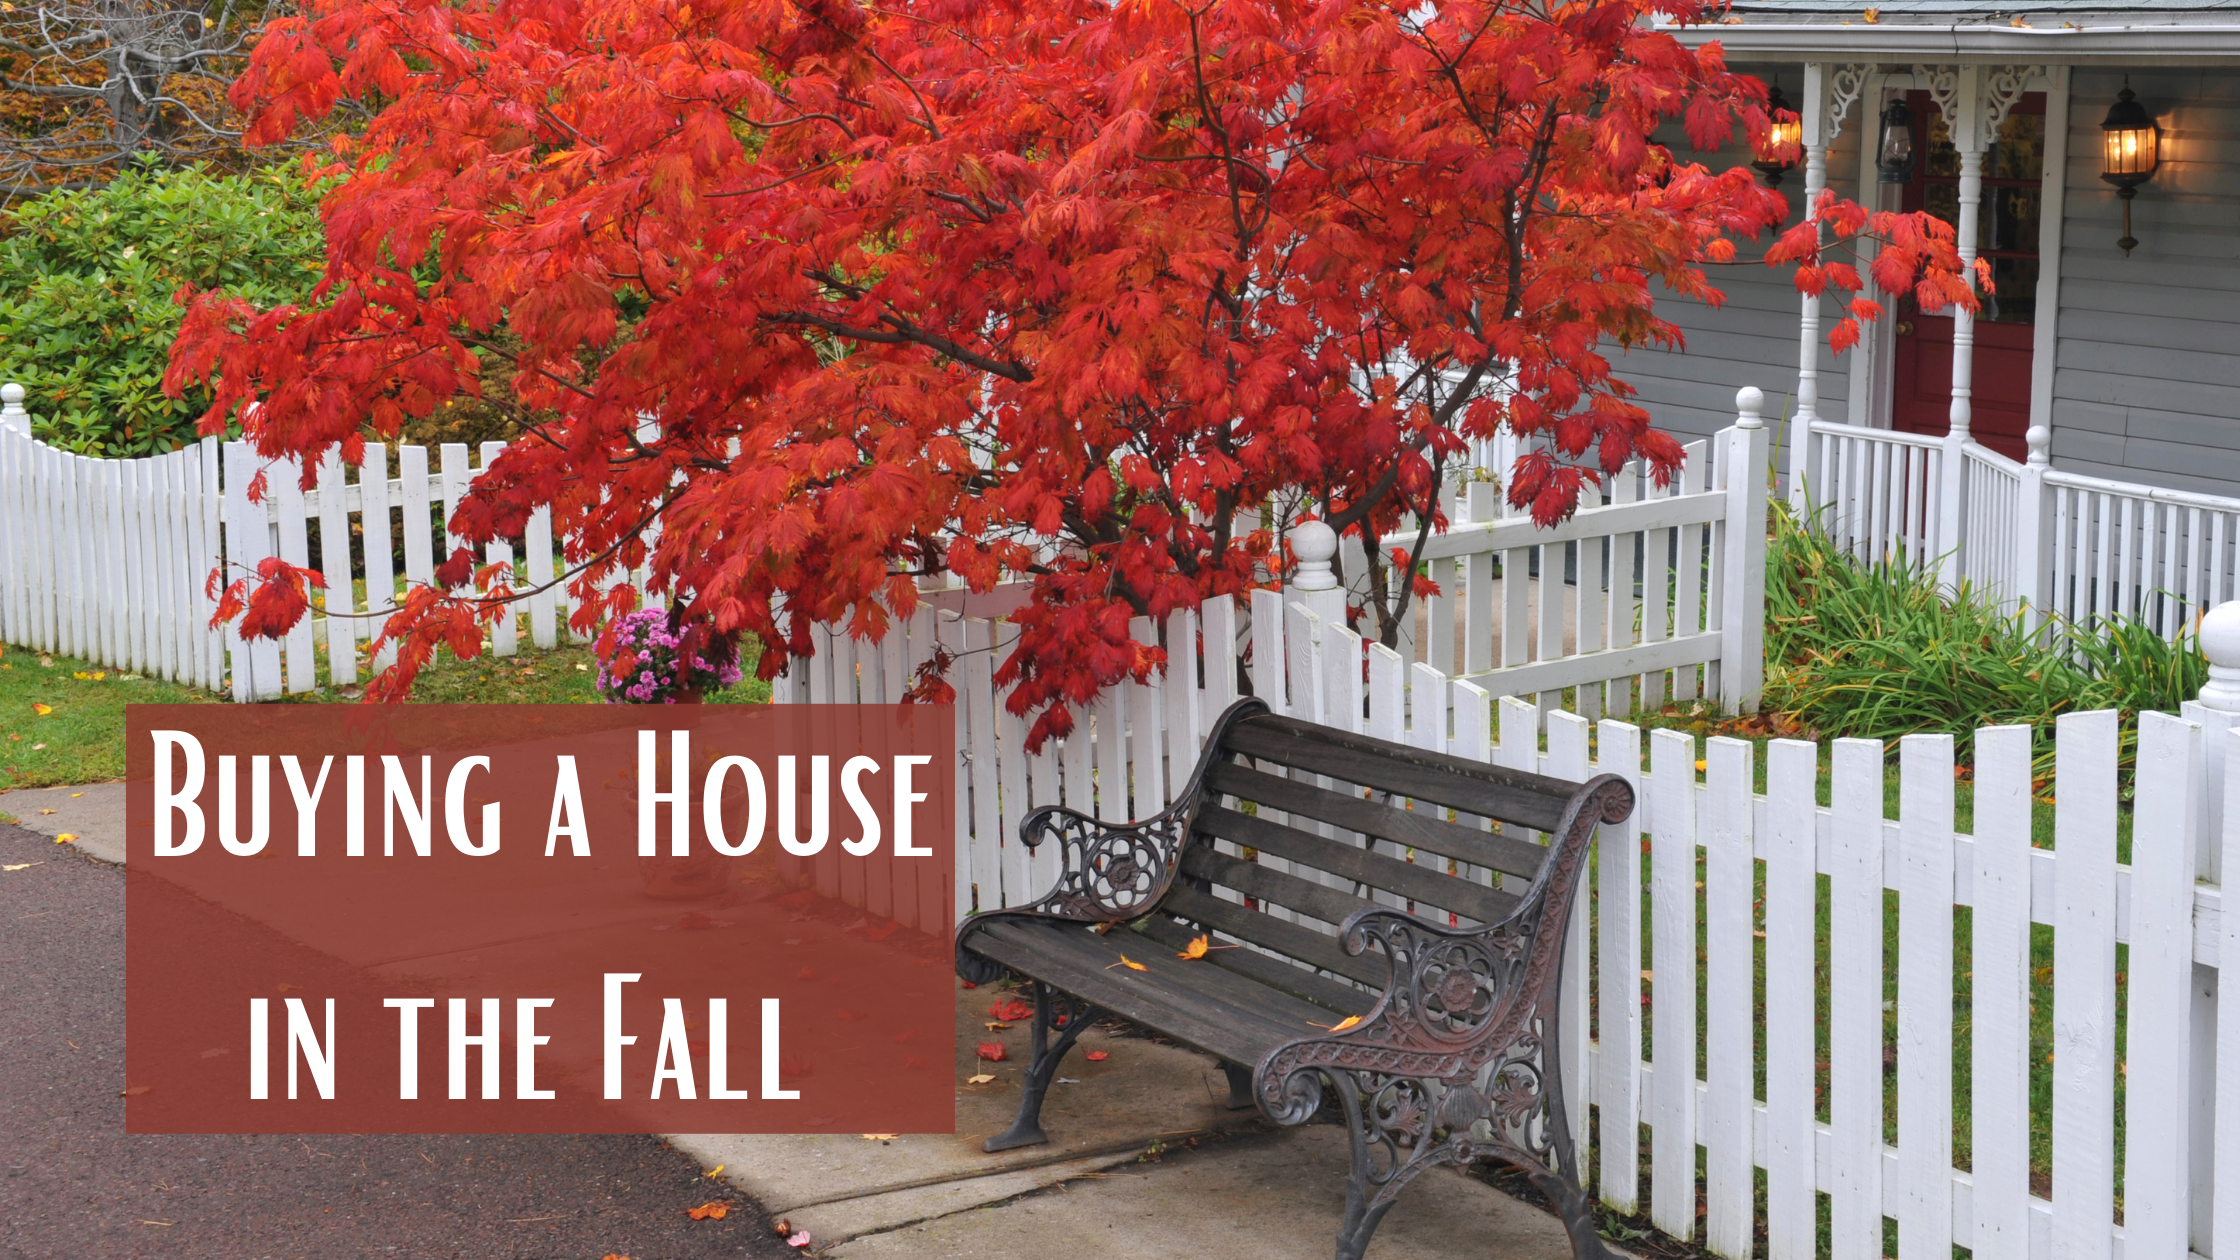 Buying a House in the Fall or Winter? Make Sure to Check These Things